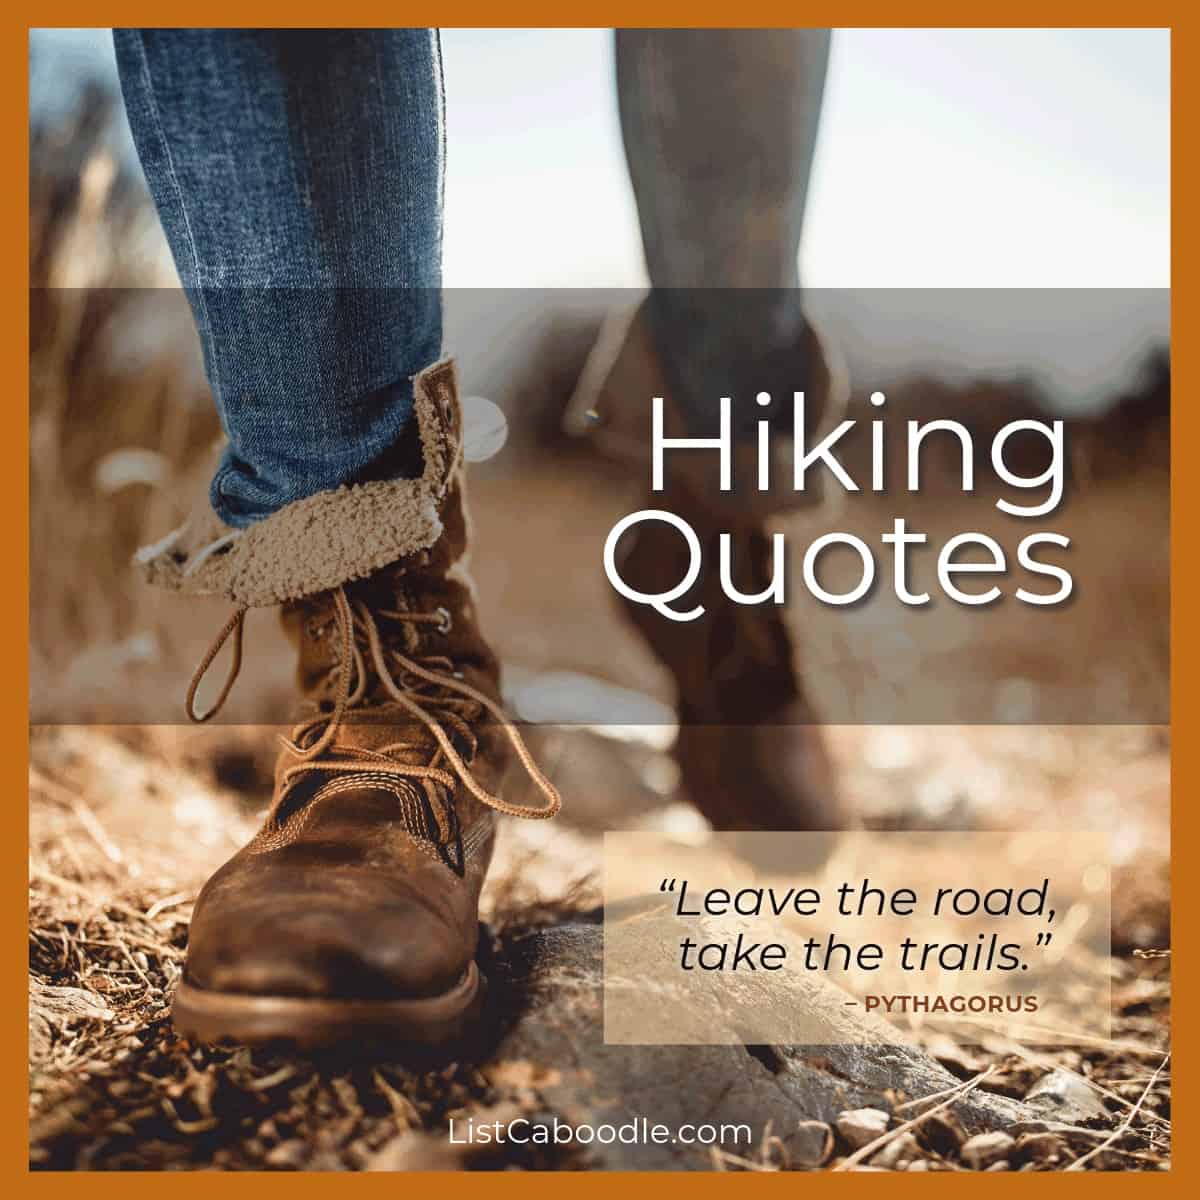 Hiking quotes, sayings